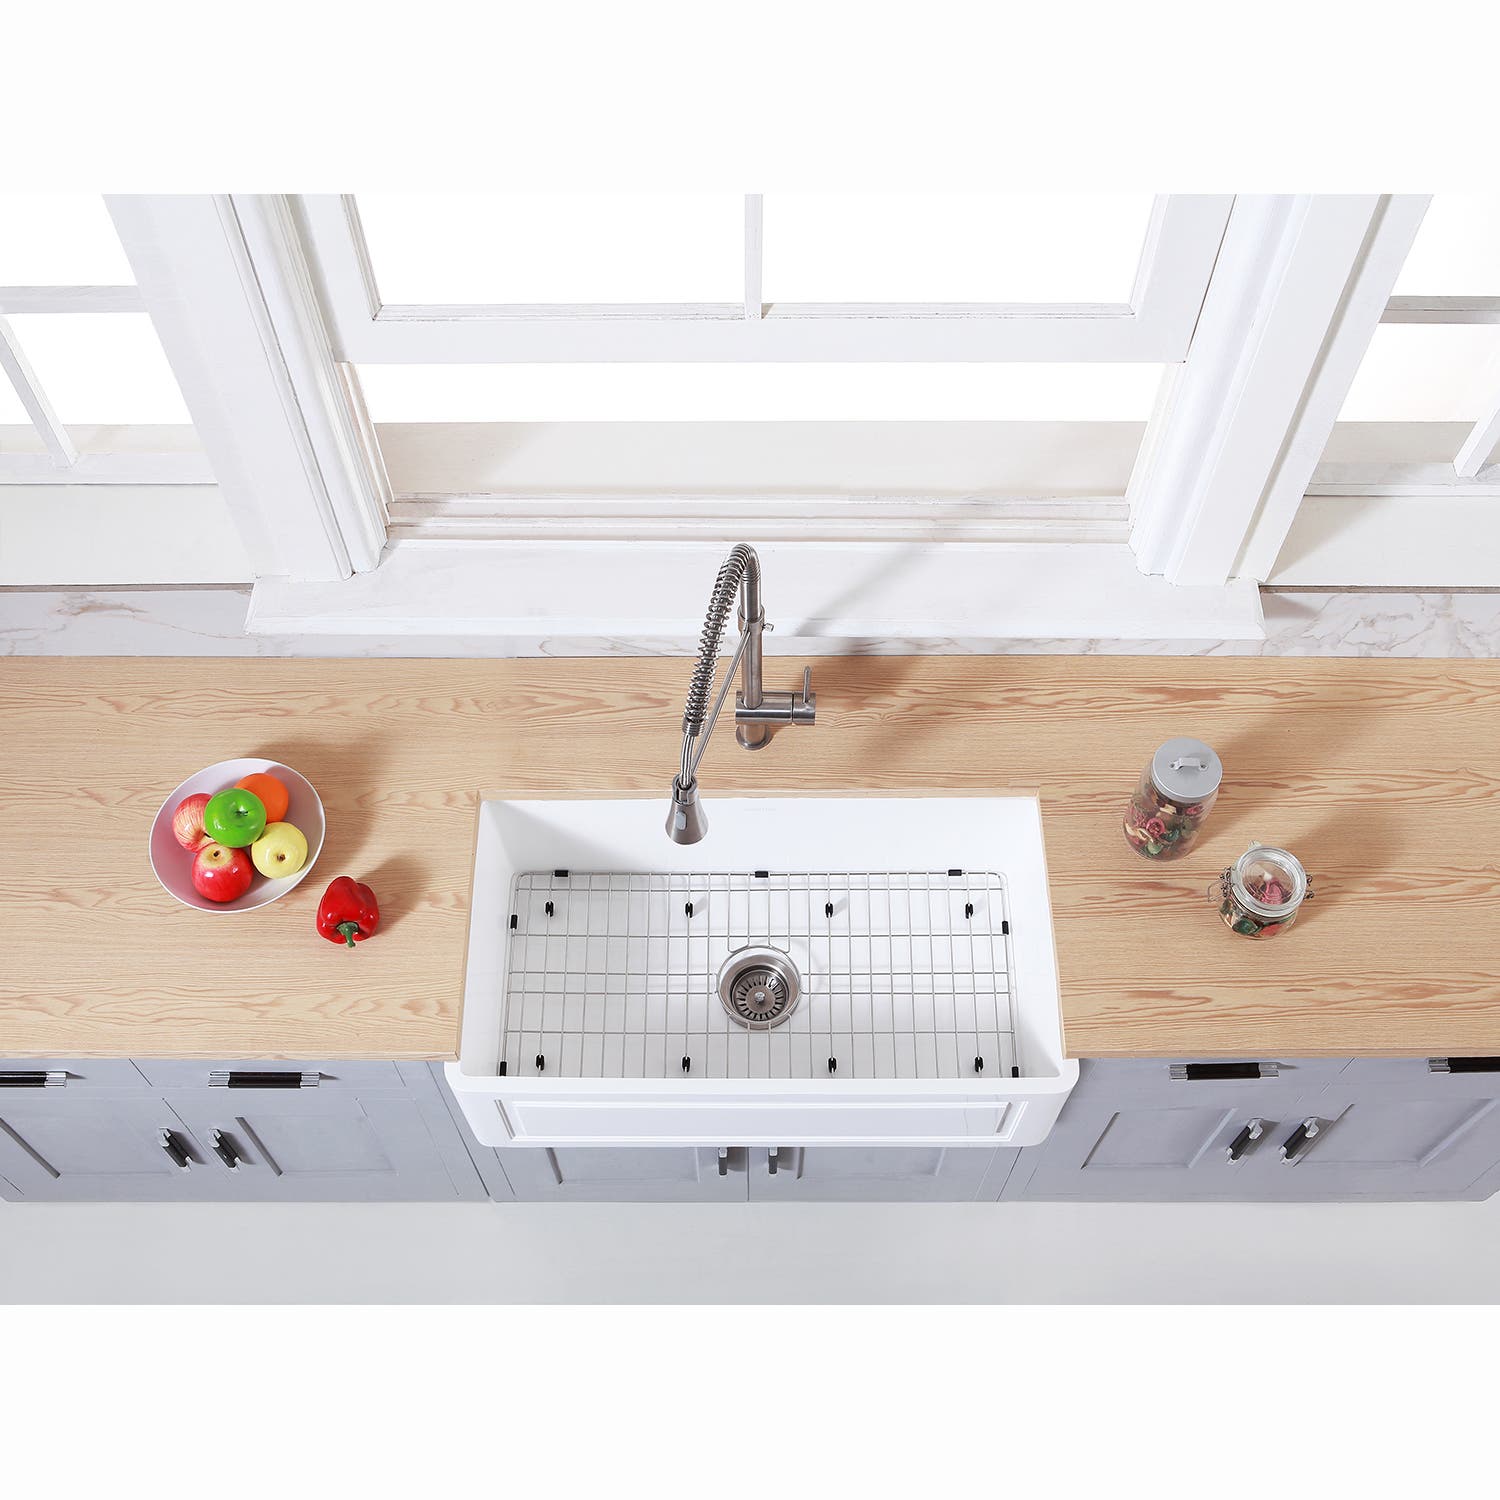 Kingston Brass 33 in. Farmhouse Kitchen Sink with Strainer and Grid, Matte White (KGKFA331810LD)